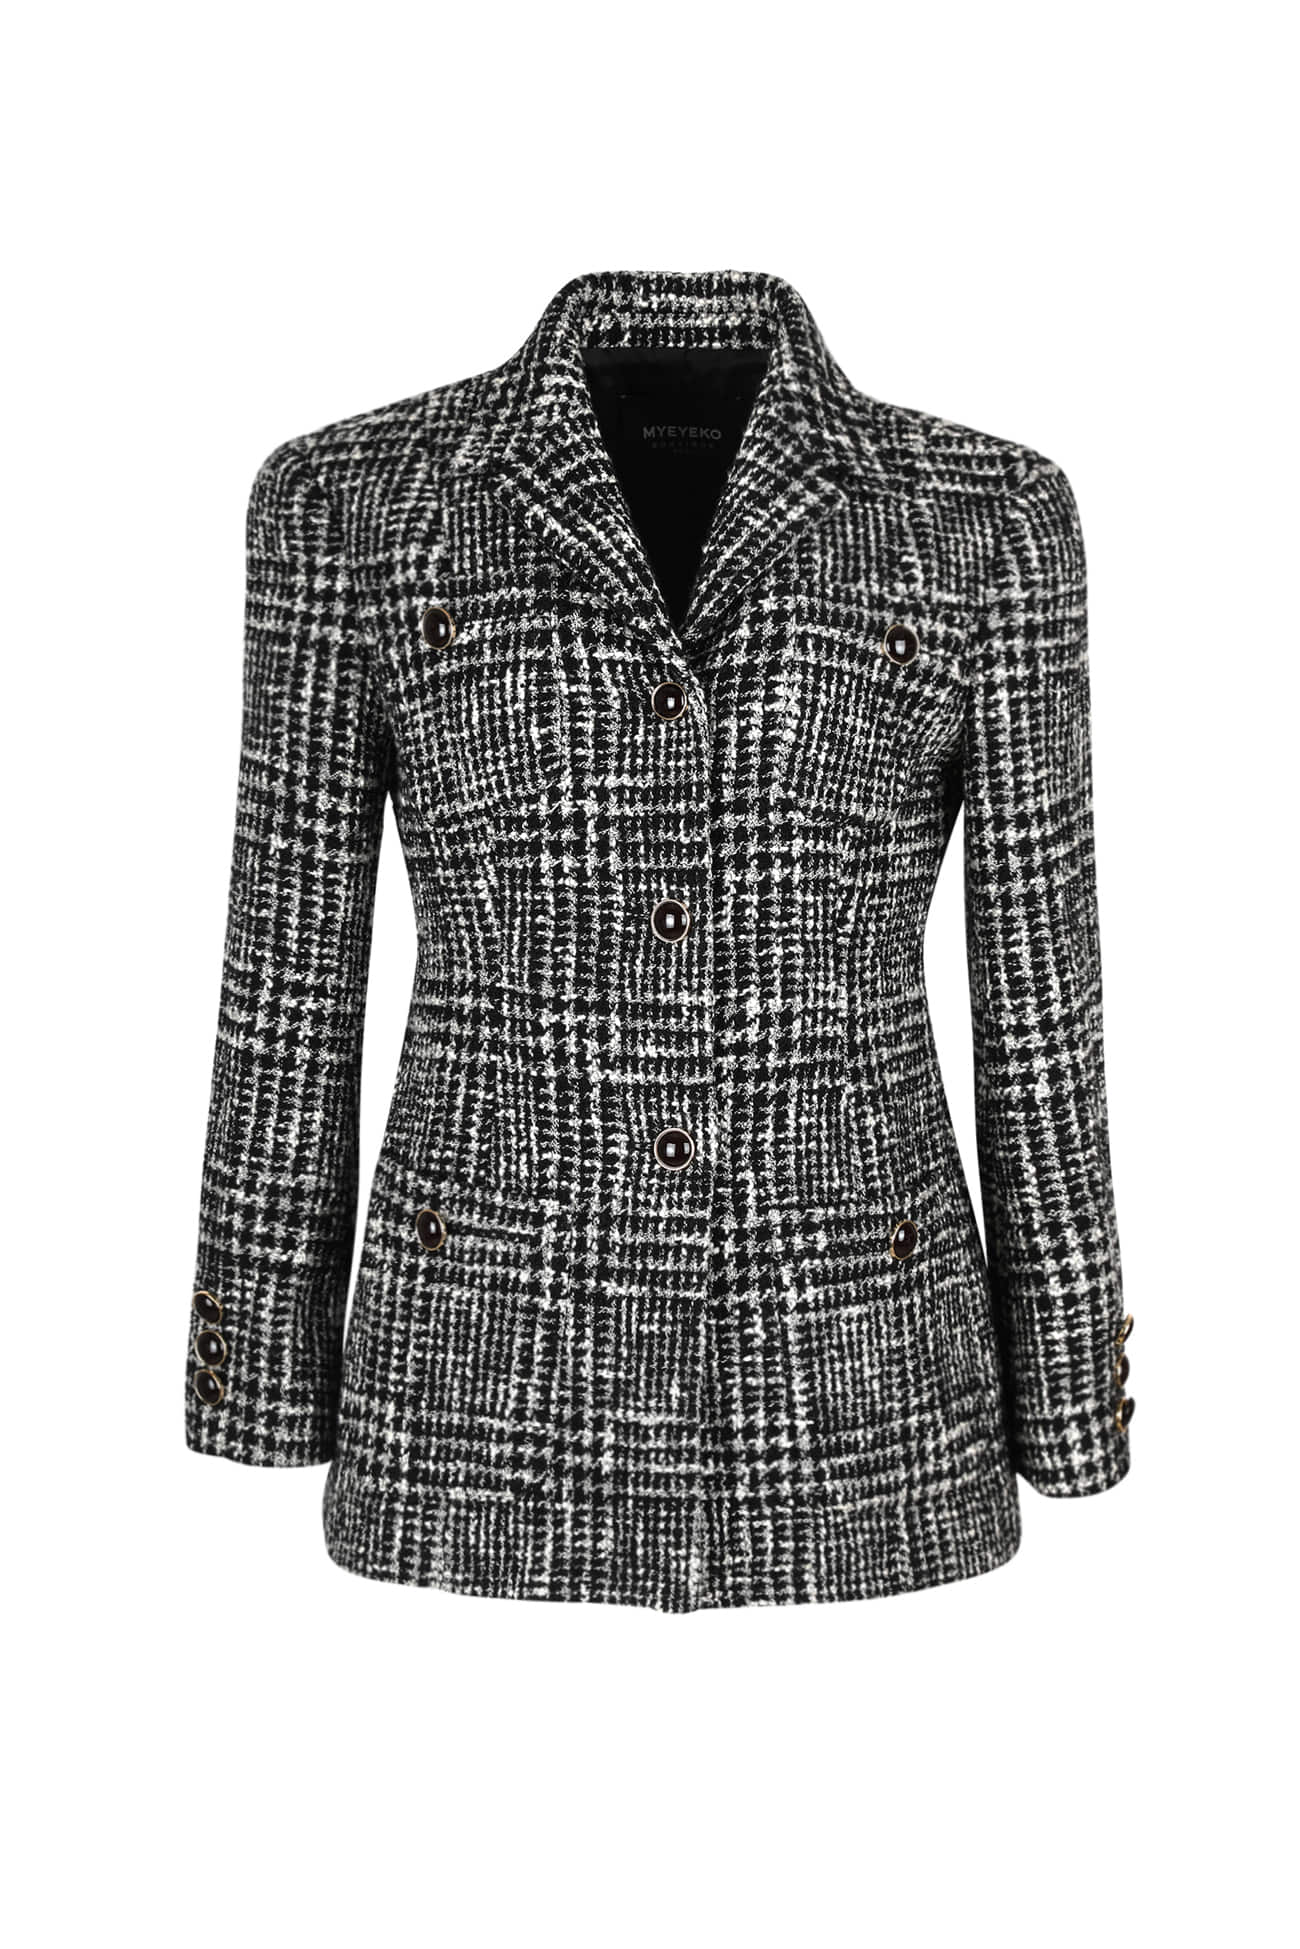 HIGH QUALITY LINE - CHECK Tweed Boucle Jacket (Fabric by FINETEX, Made in JAPAN)